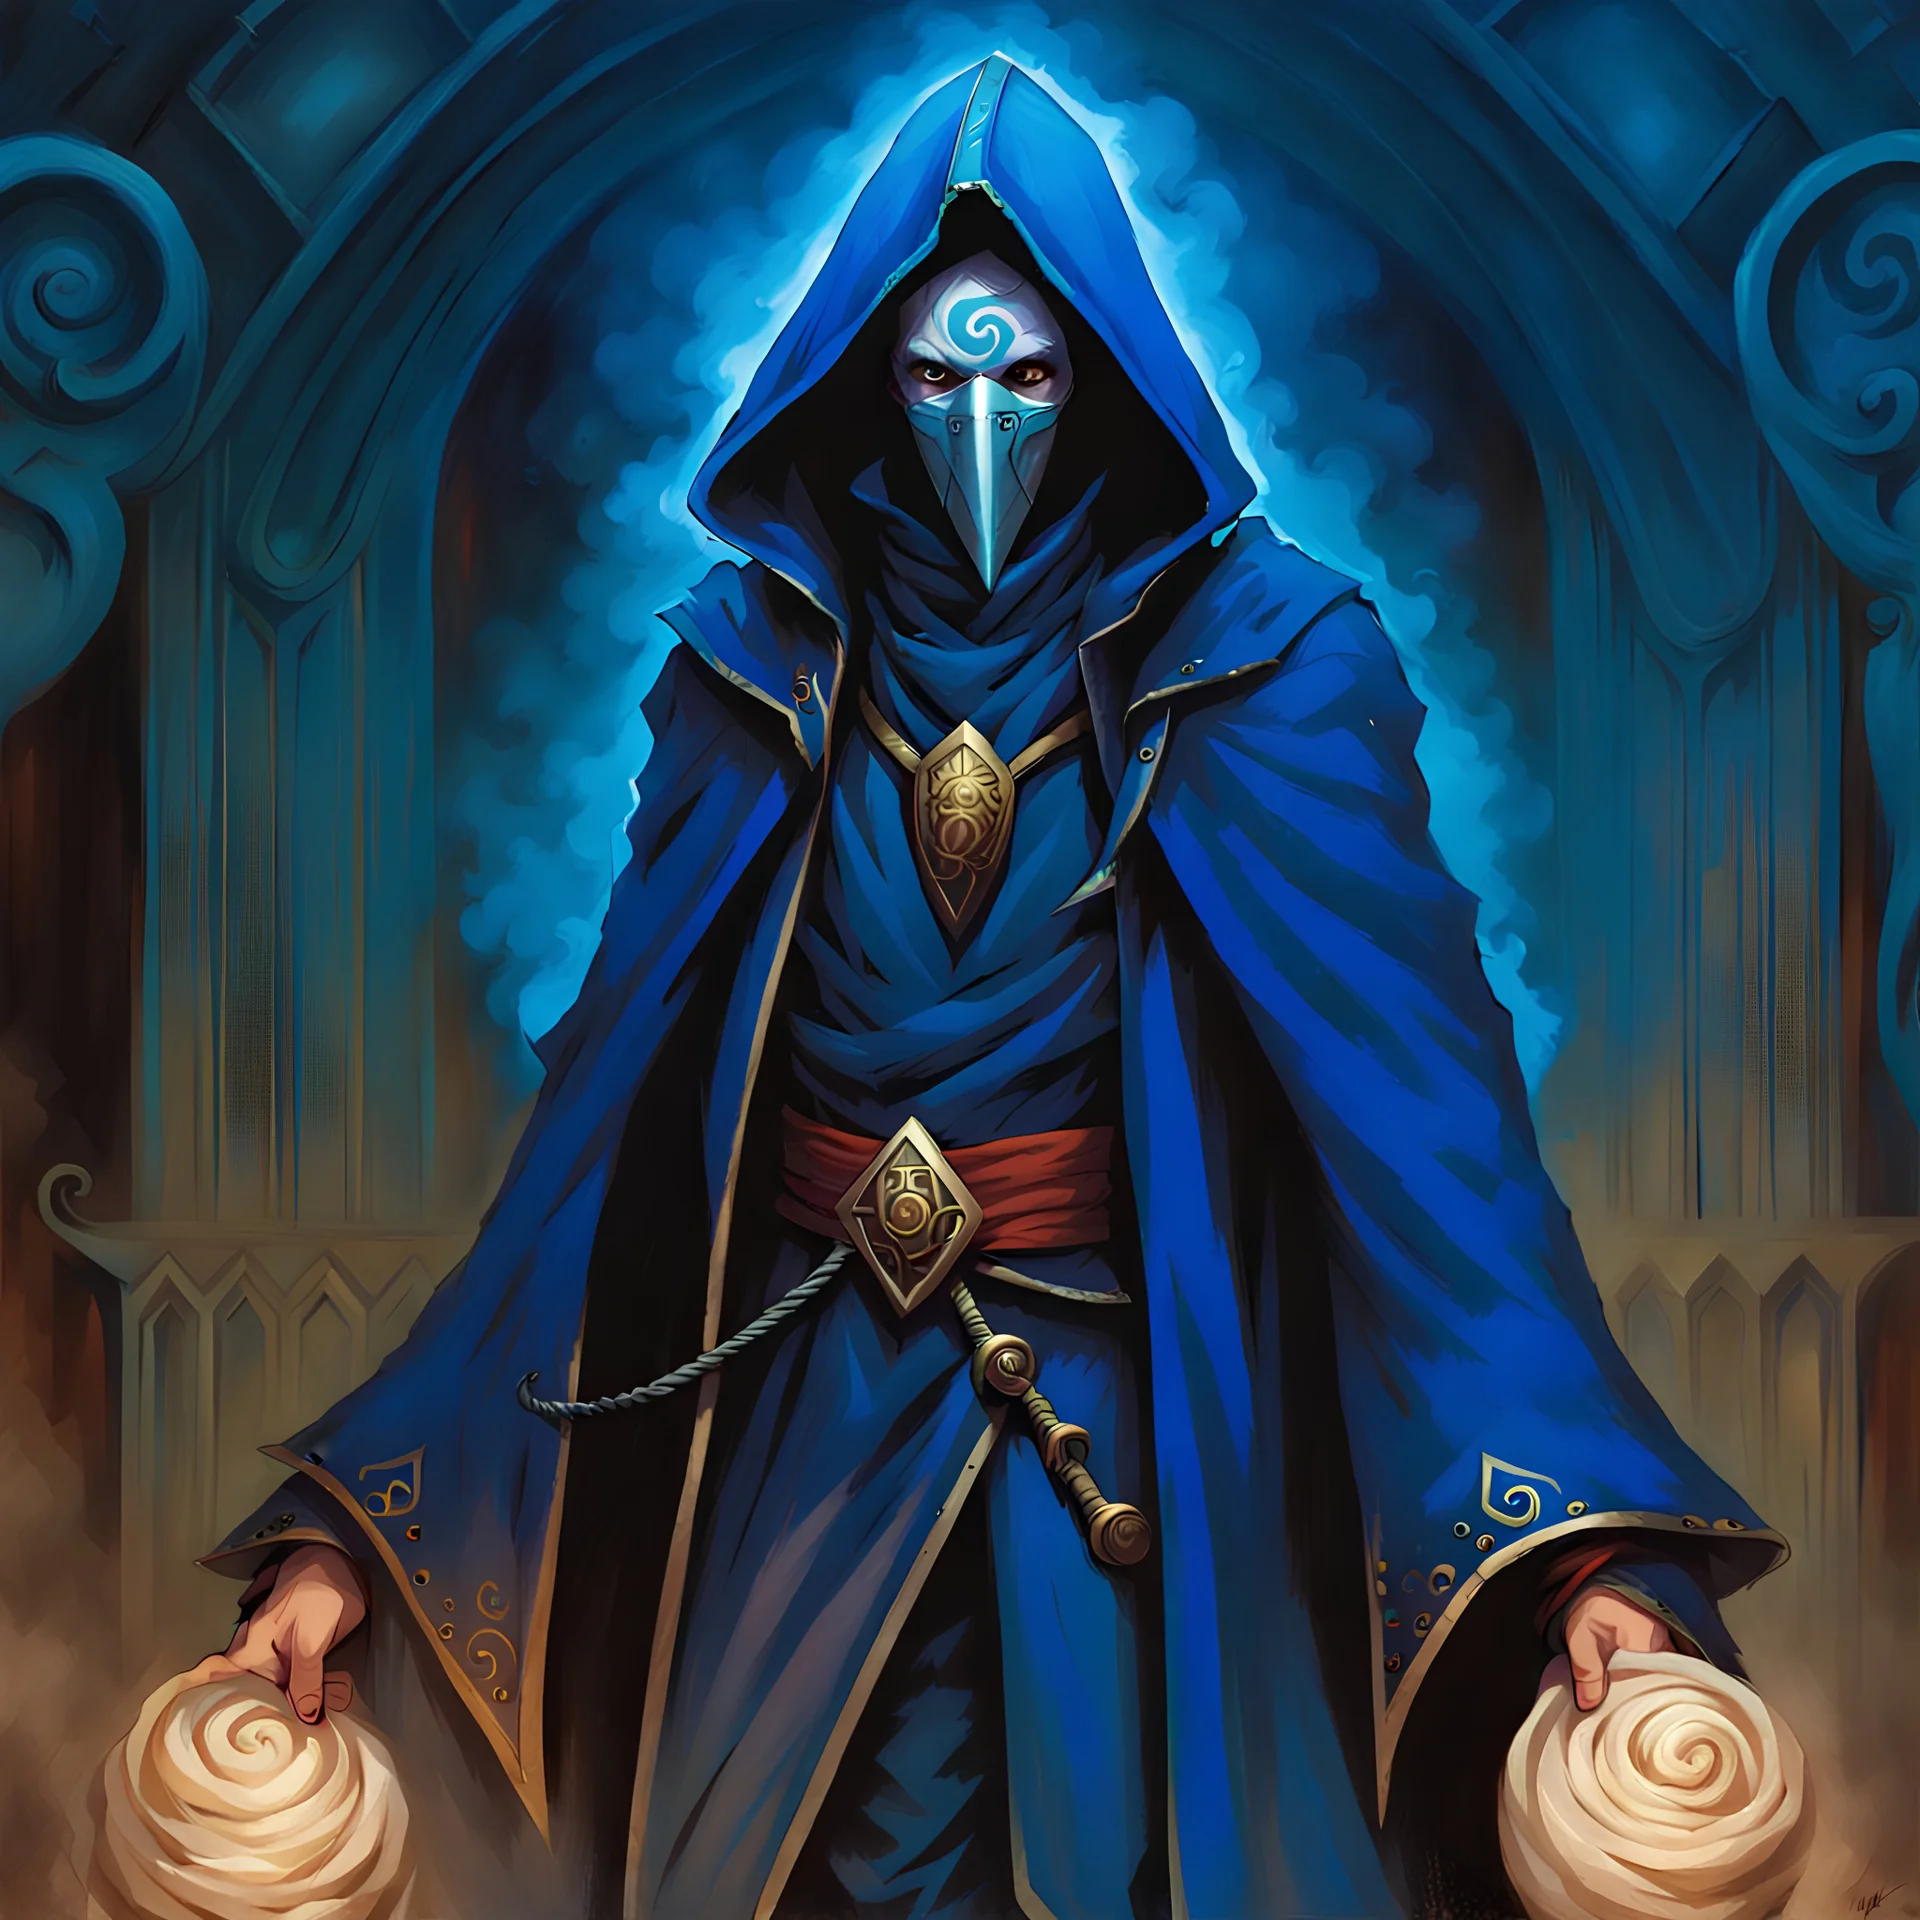 90's fantasy tcg art of a hooded man with a spiral mask in a blue circus